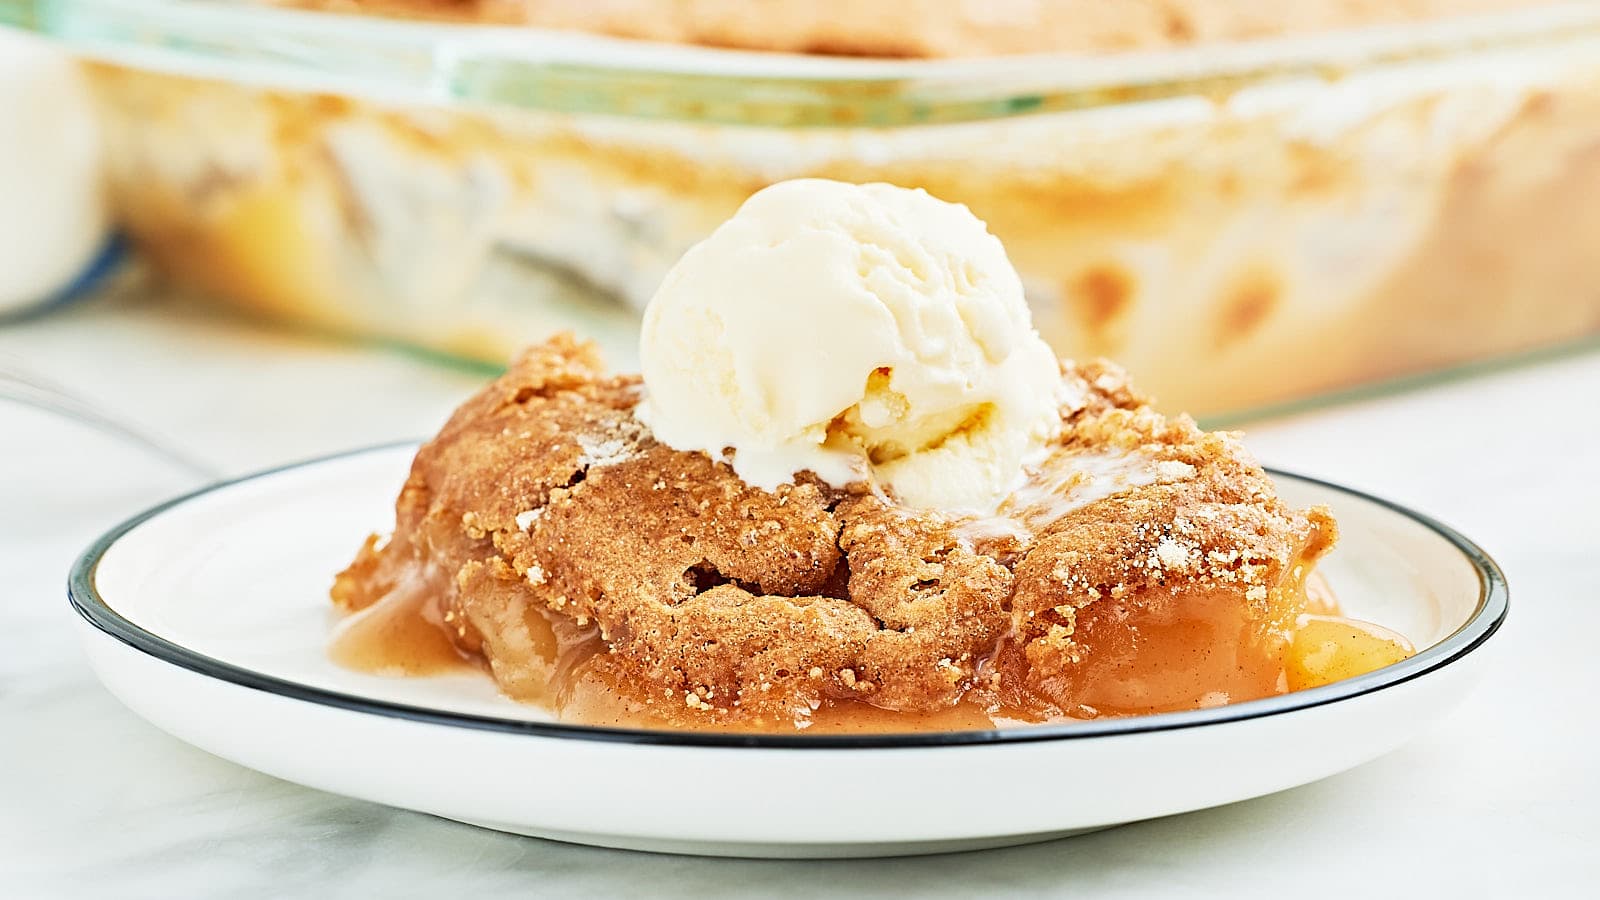 Closeup of an Apple Spice Dump Cake served with a scoop of vanilla ice cream.